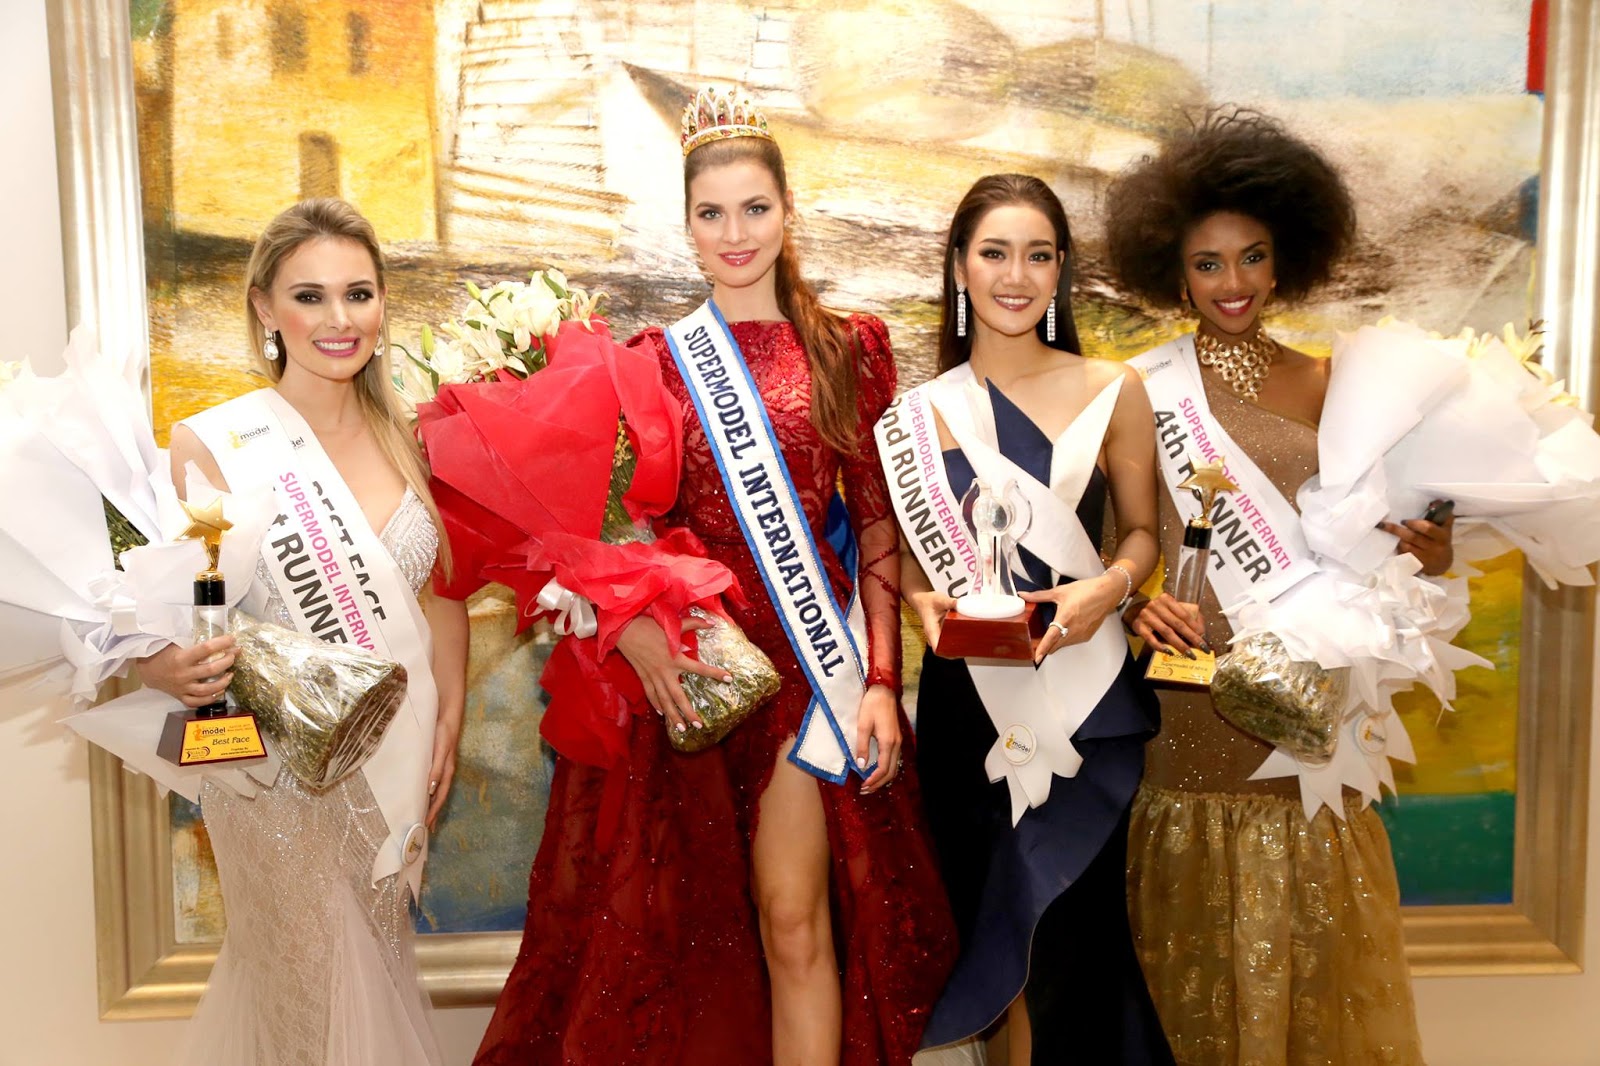 The Pageant Crown Ranking Miss Supermodel International 2017